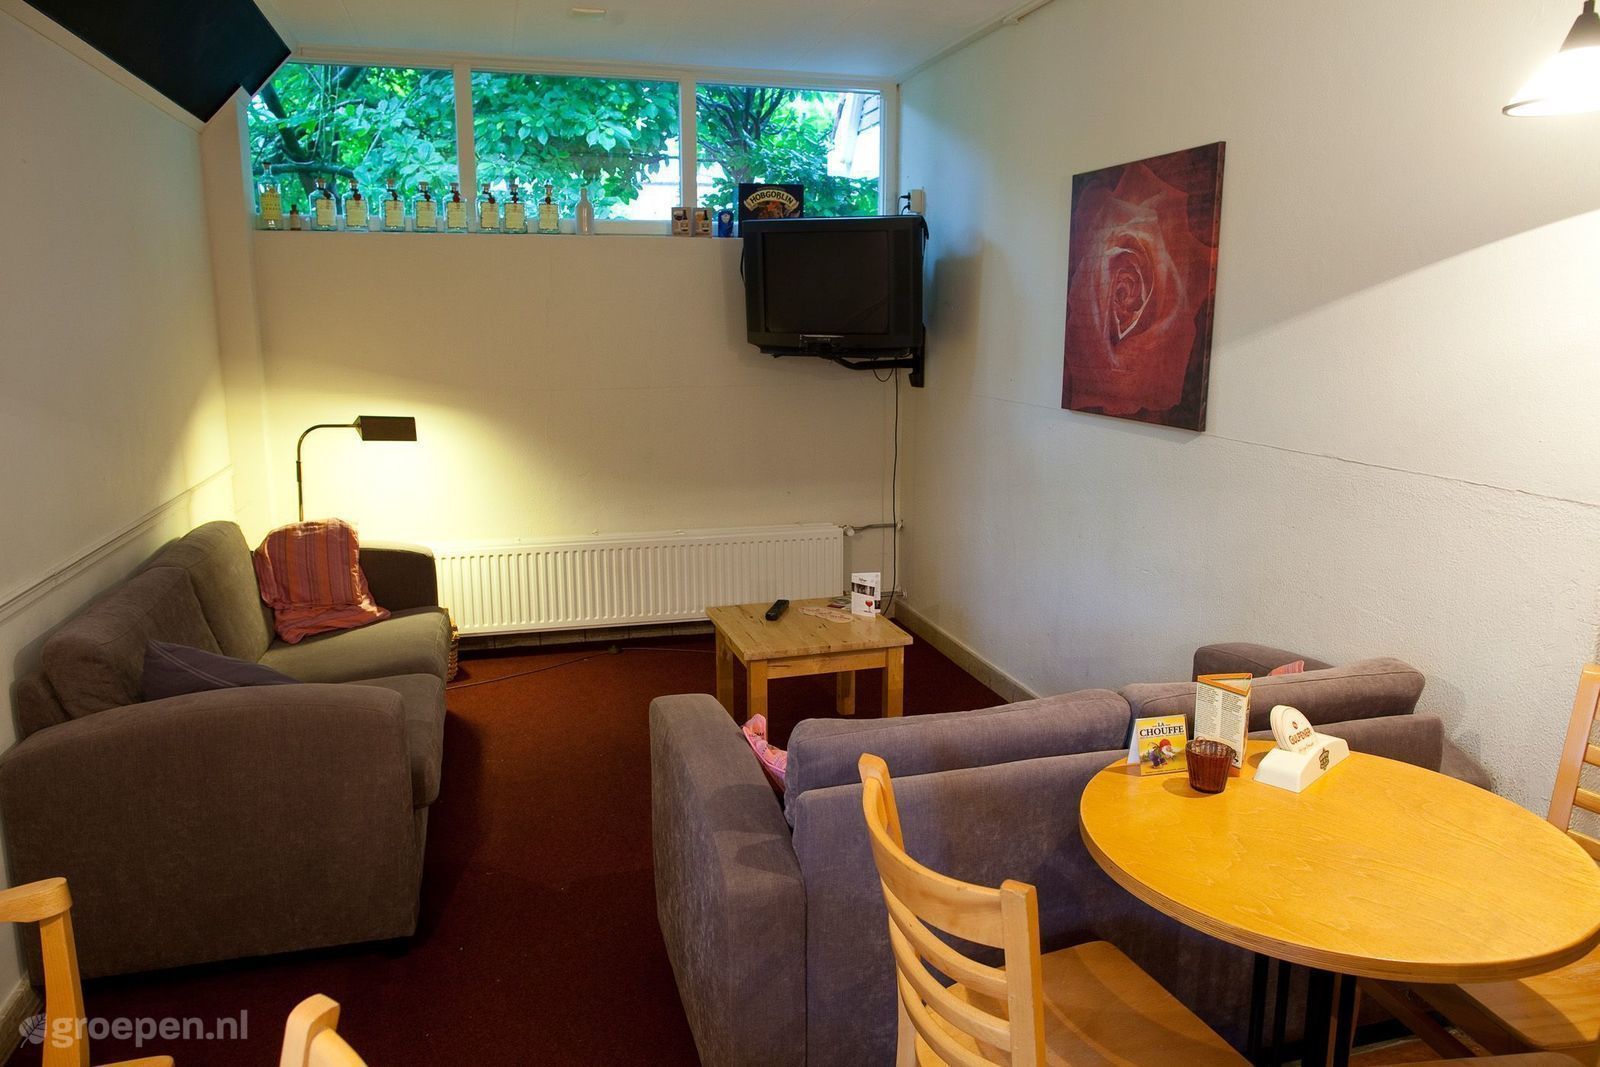 Group accommodation Meppel